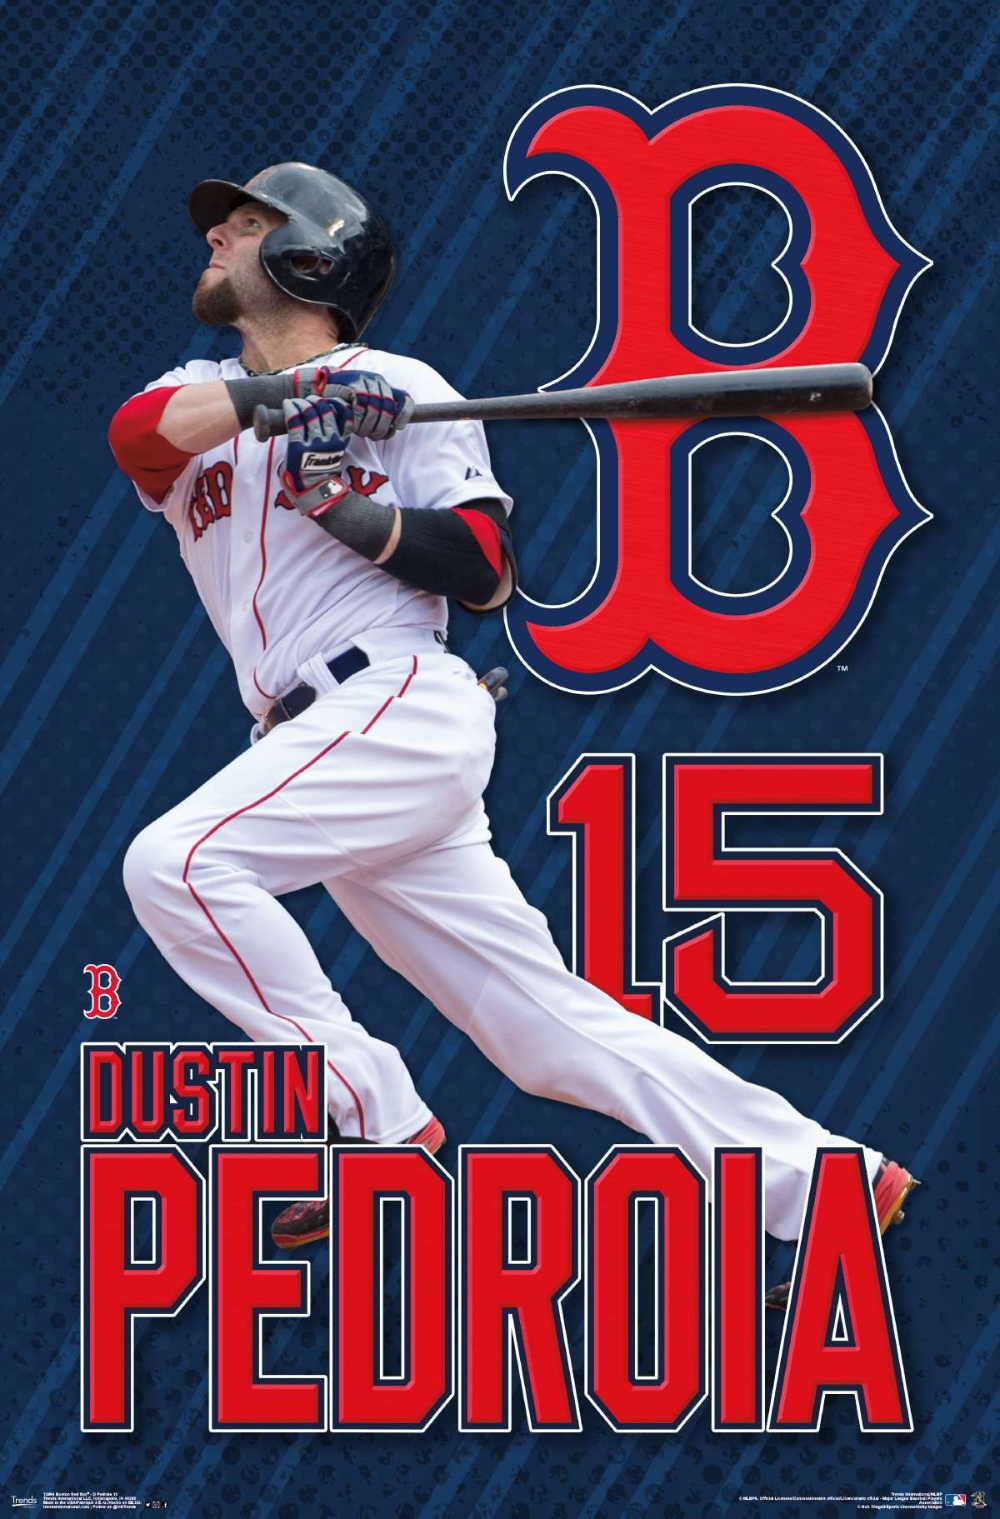 MLB Boston Red Sox Pedroia 15. Baseball posters, Dustin pedroia, Red sox nation